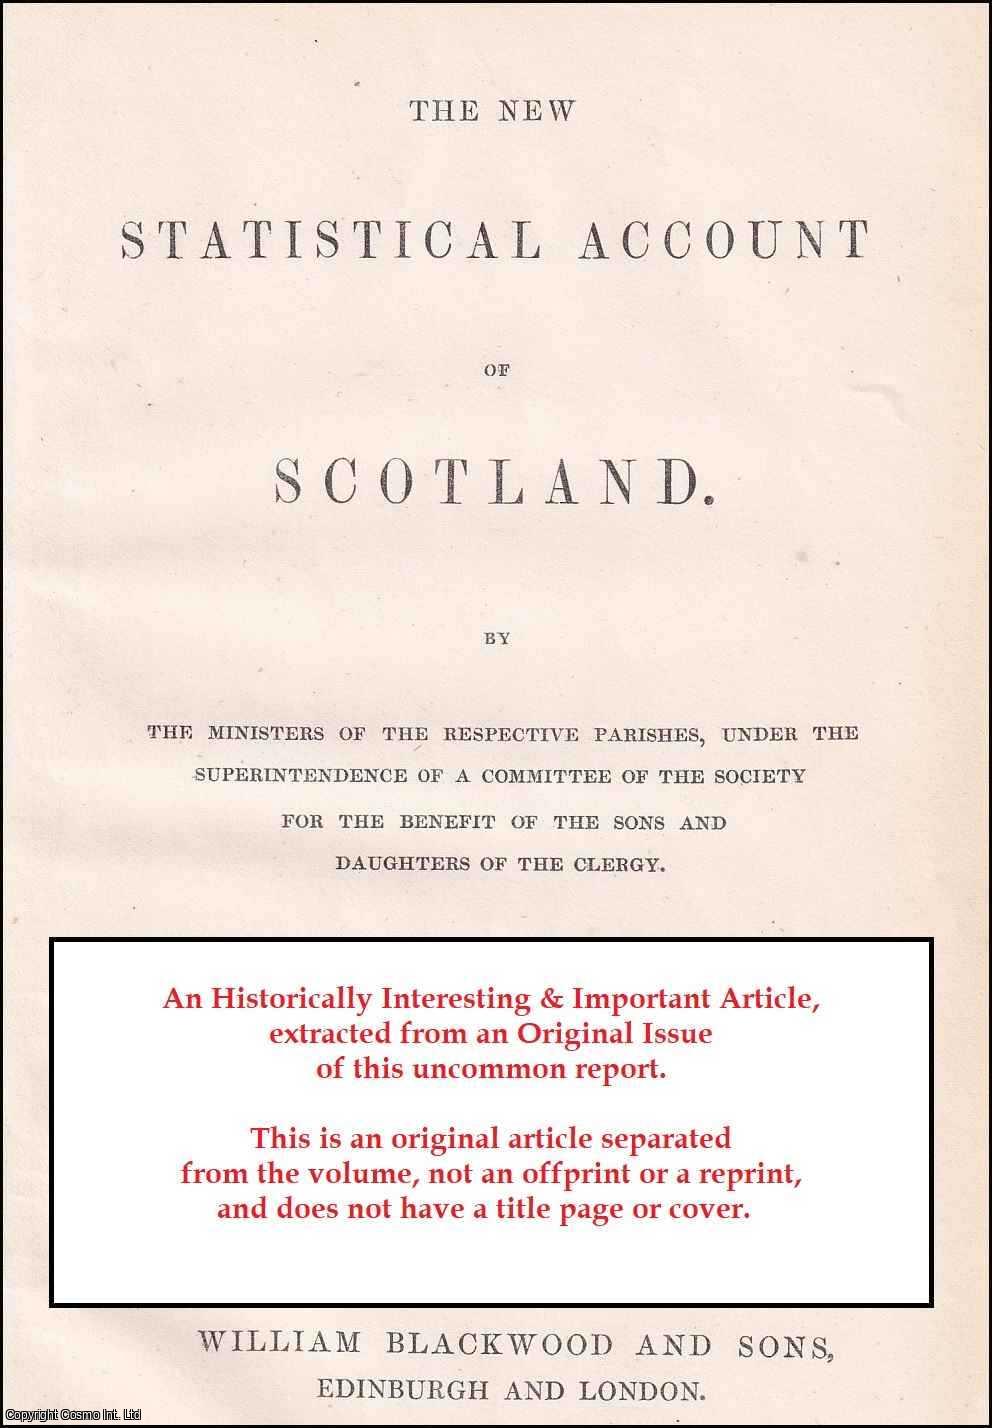 Rev. John M'Lachlan - Parish of Wemyss. Presbytery of Kirkaldy, Synod of Fife. An uncommon original article from The New Statistical Account of Scotland, 1845.